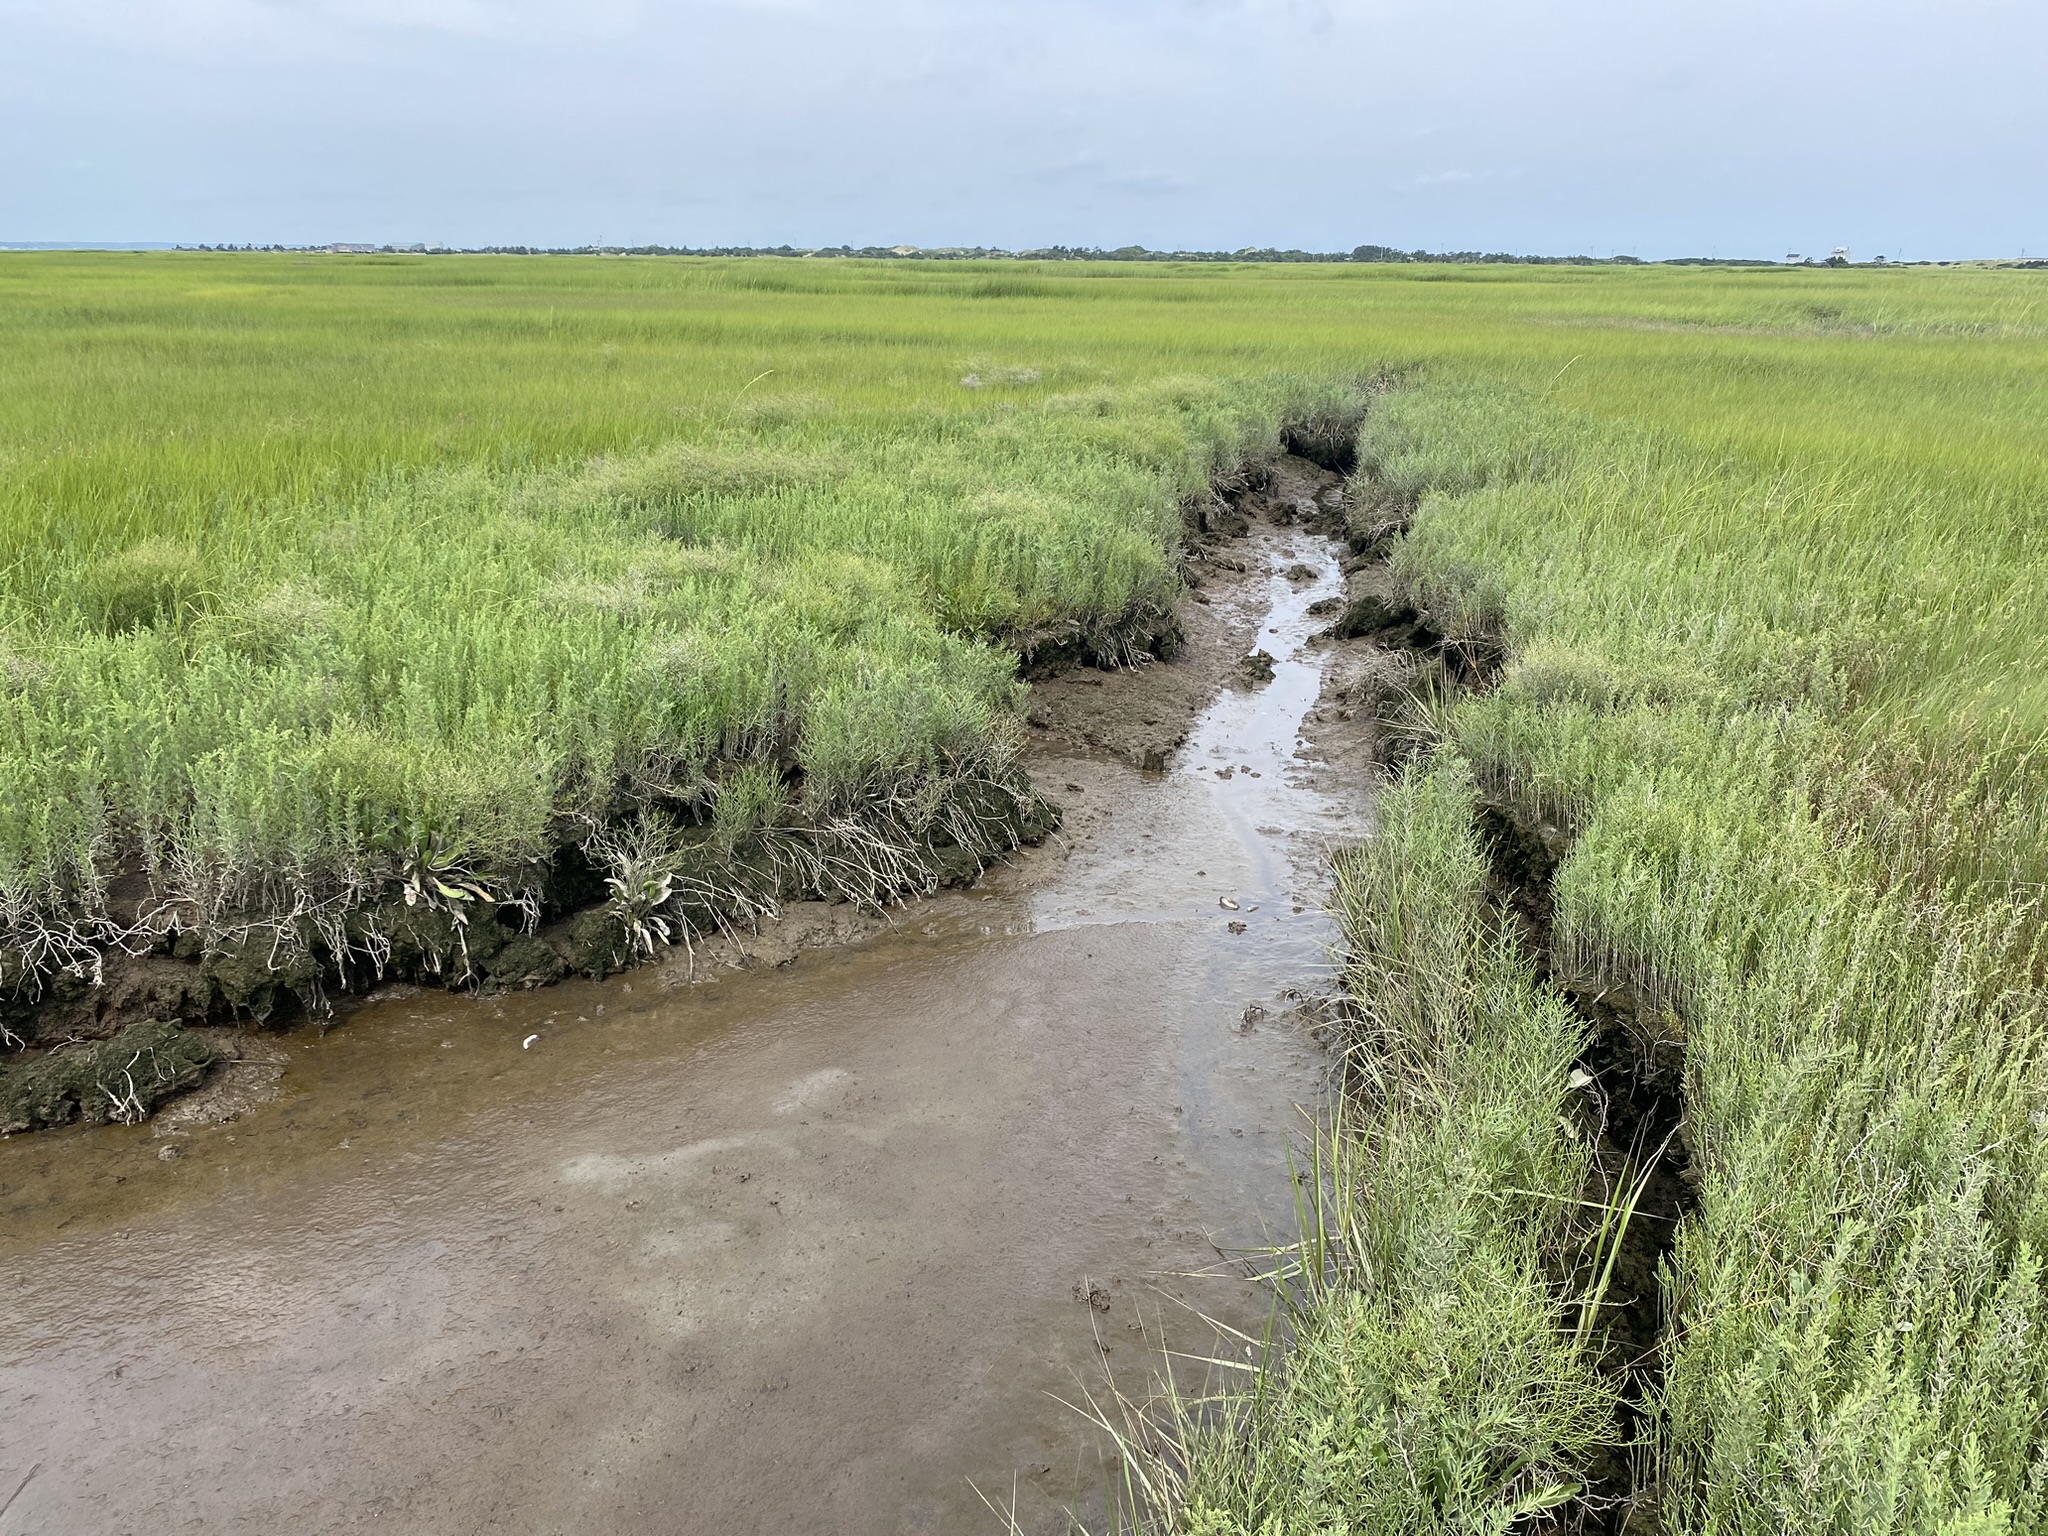 Chase Garden Creek marsh showing signs of degradation